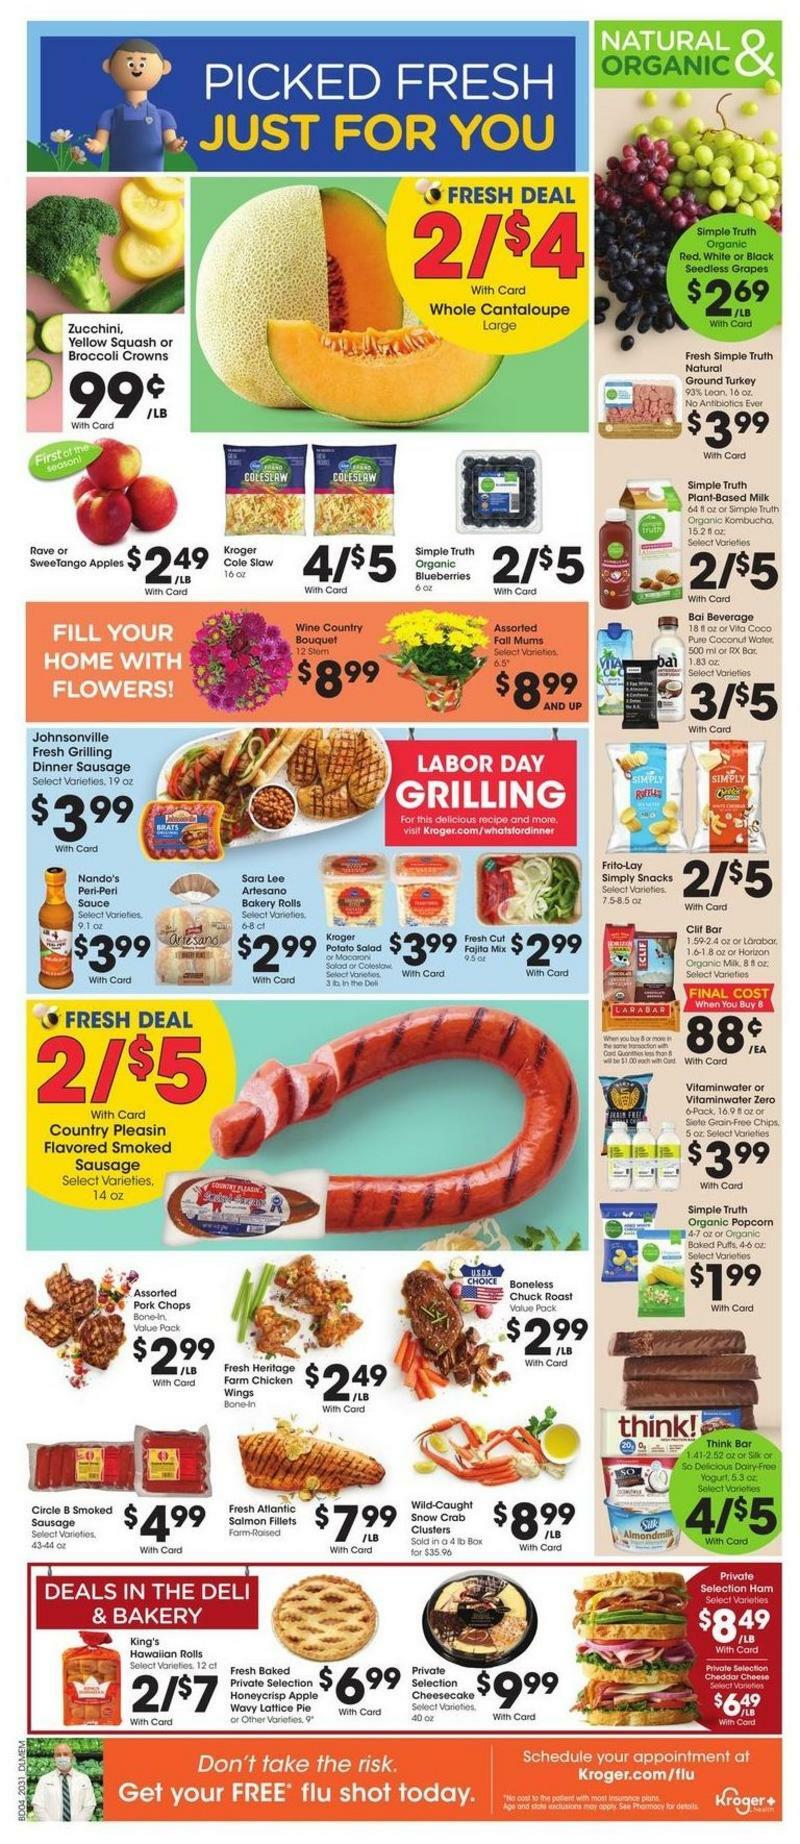 Kroger Weekly Ads & Special Buys from September 2 - Page 6